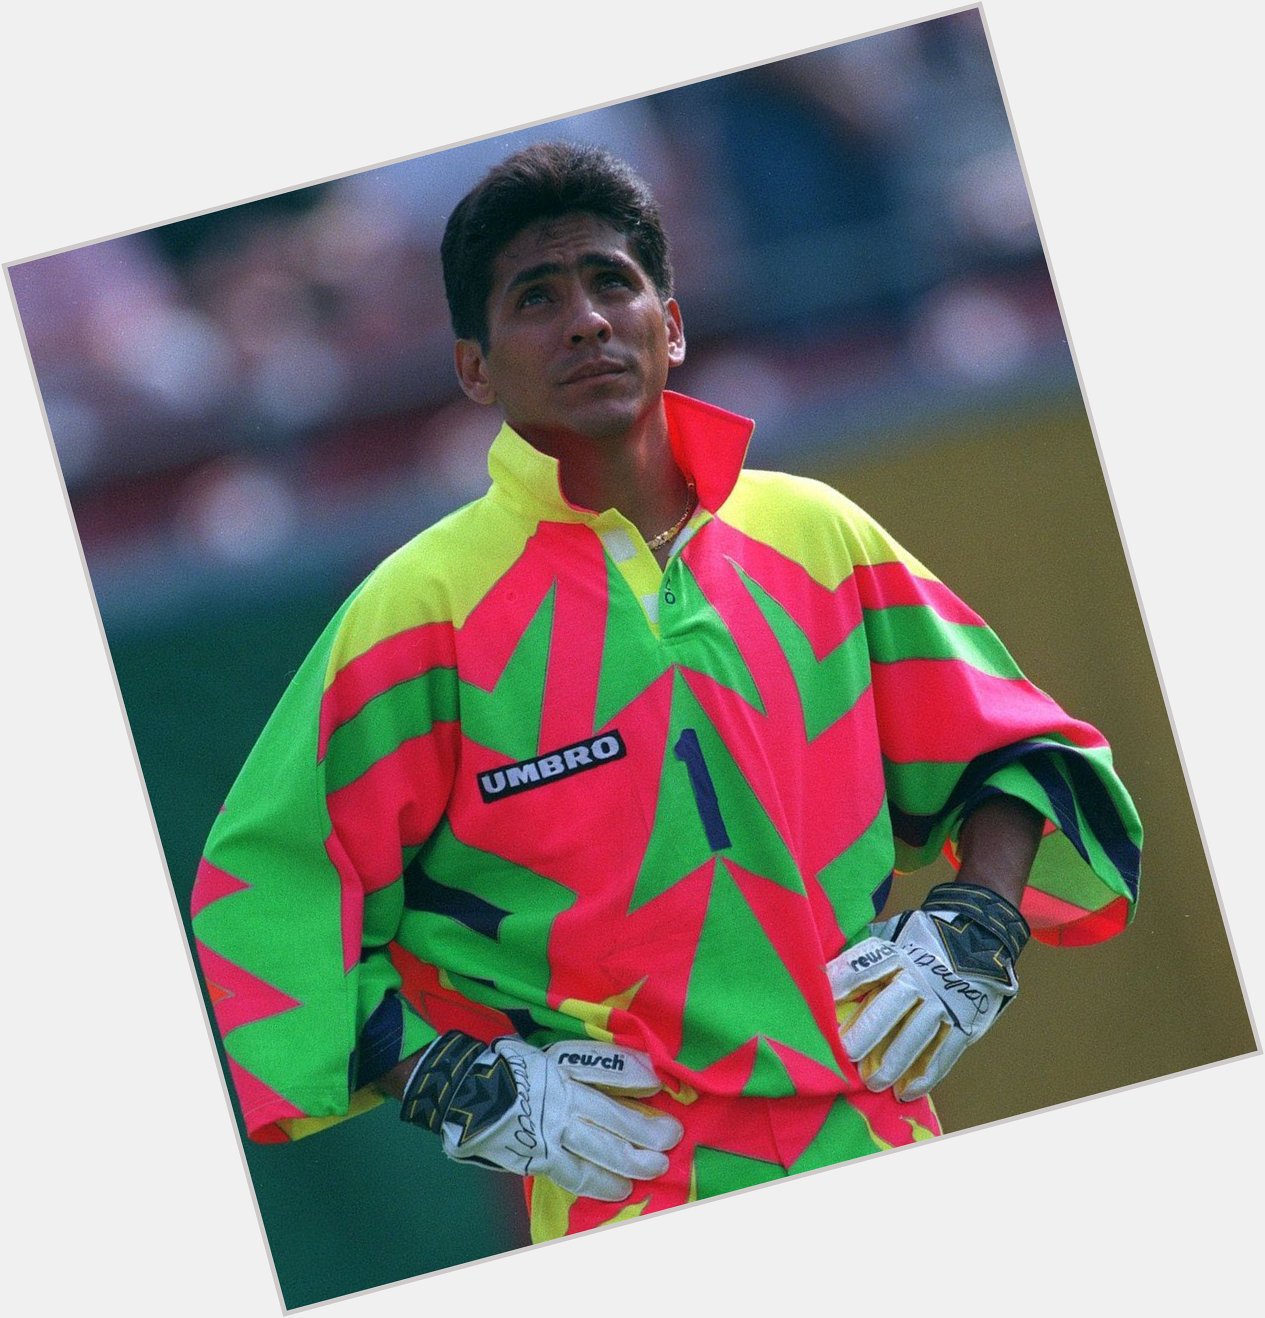 Happy birthday to Jorge Campos, who turns 55 today  